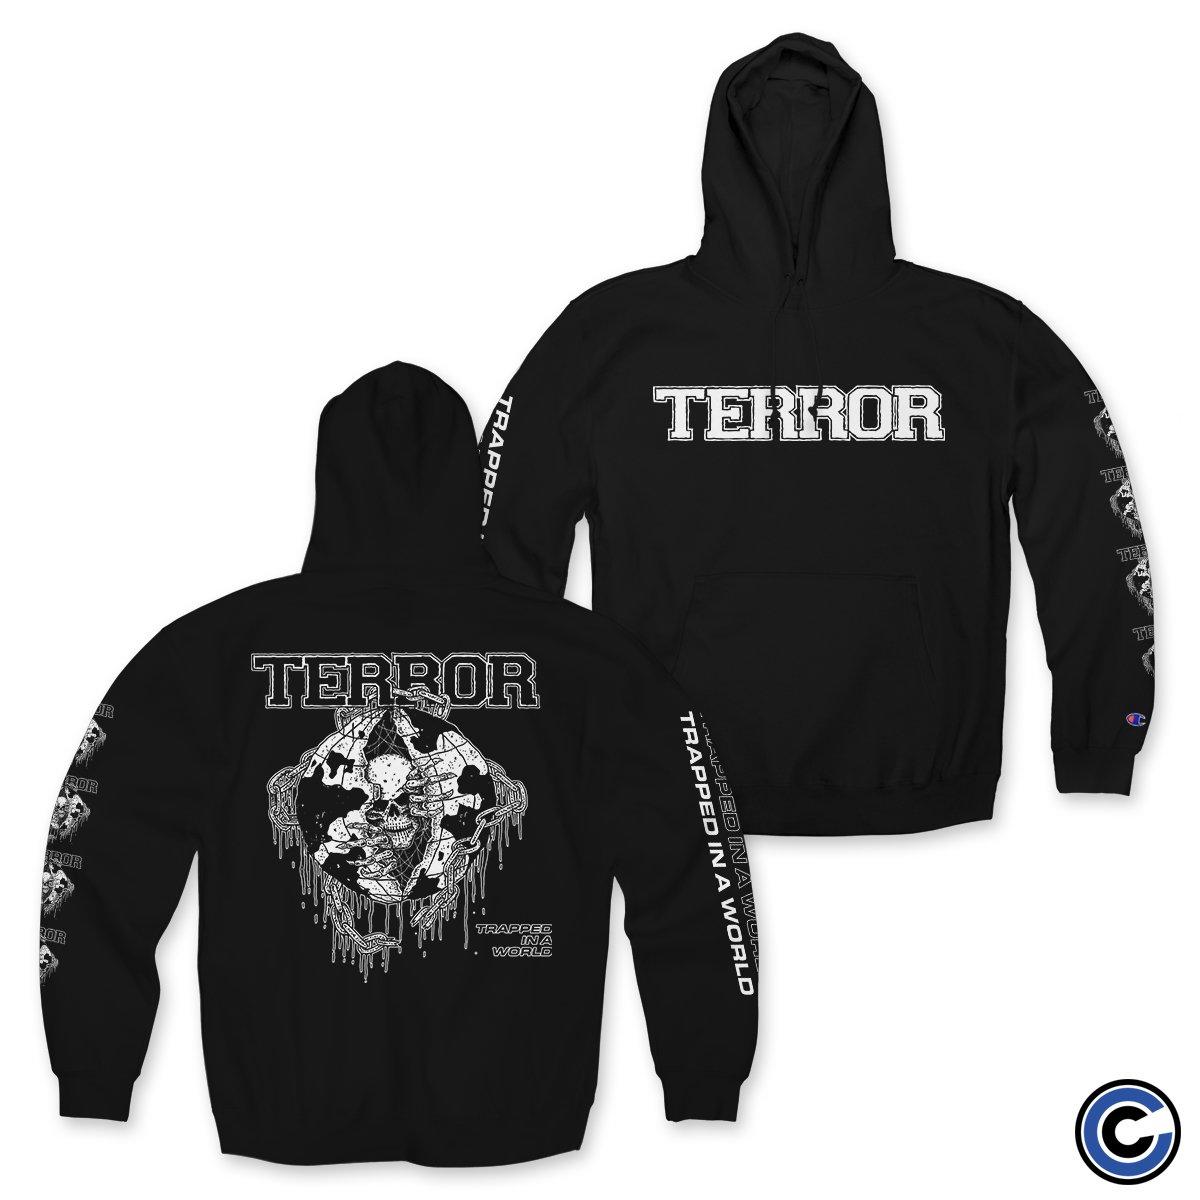 Buy – Terror "Trapped" Hoodie – Band & Music Merch – Cold Cuts Merch